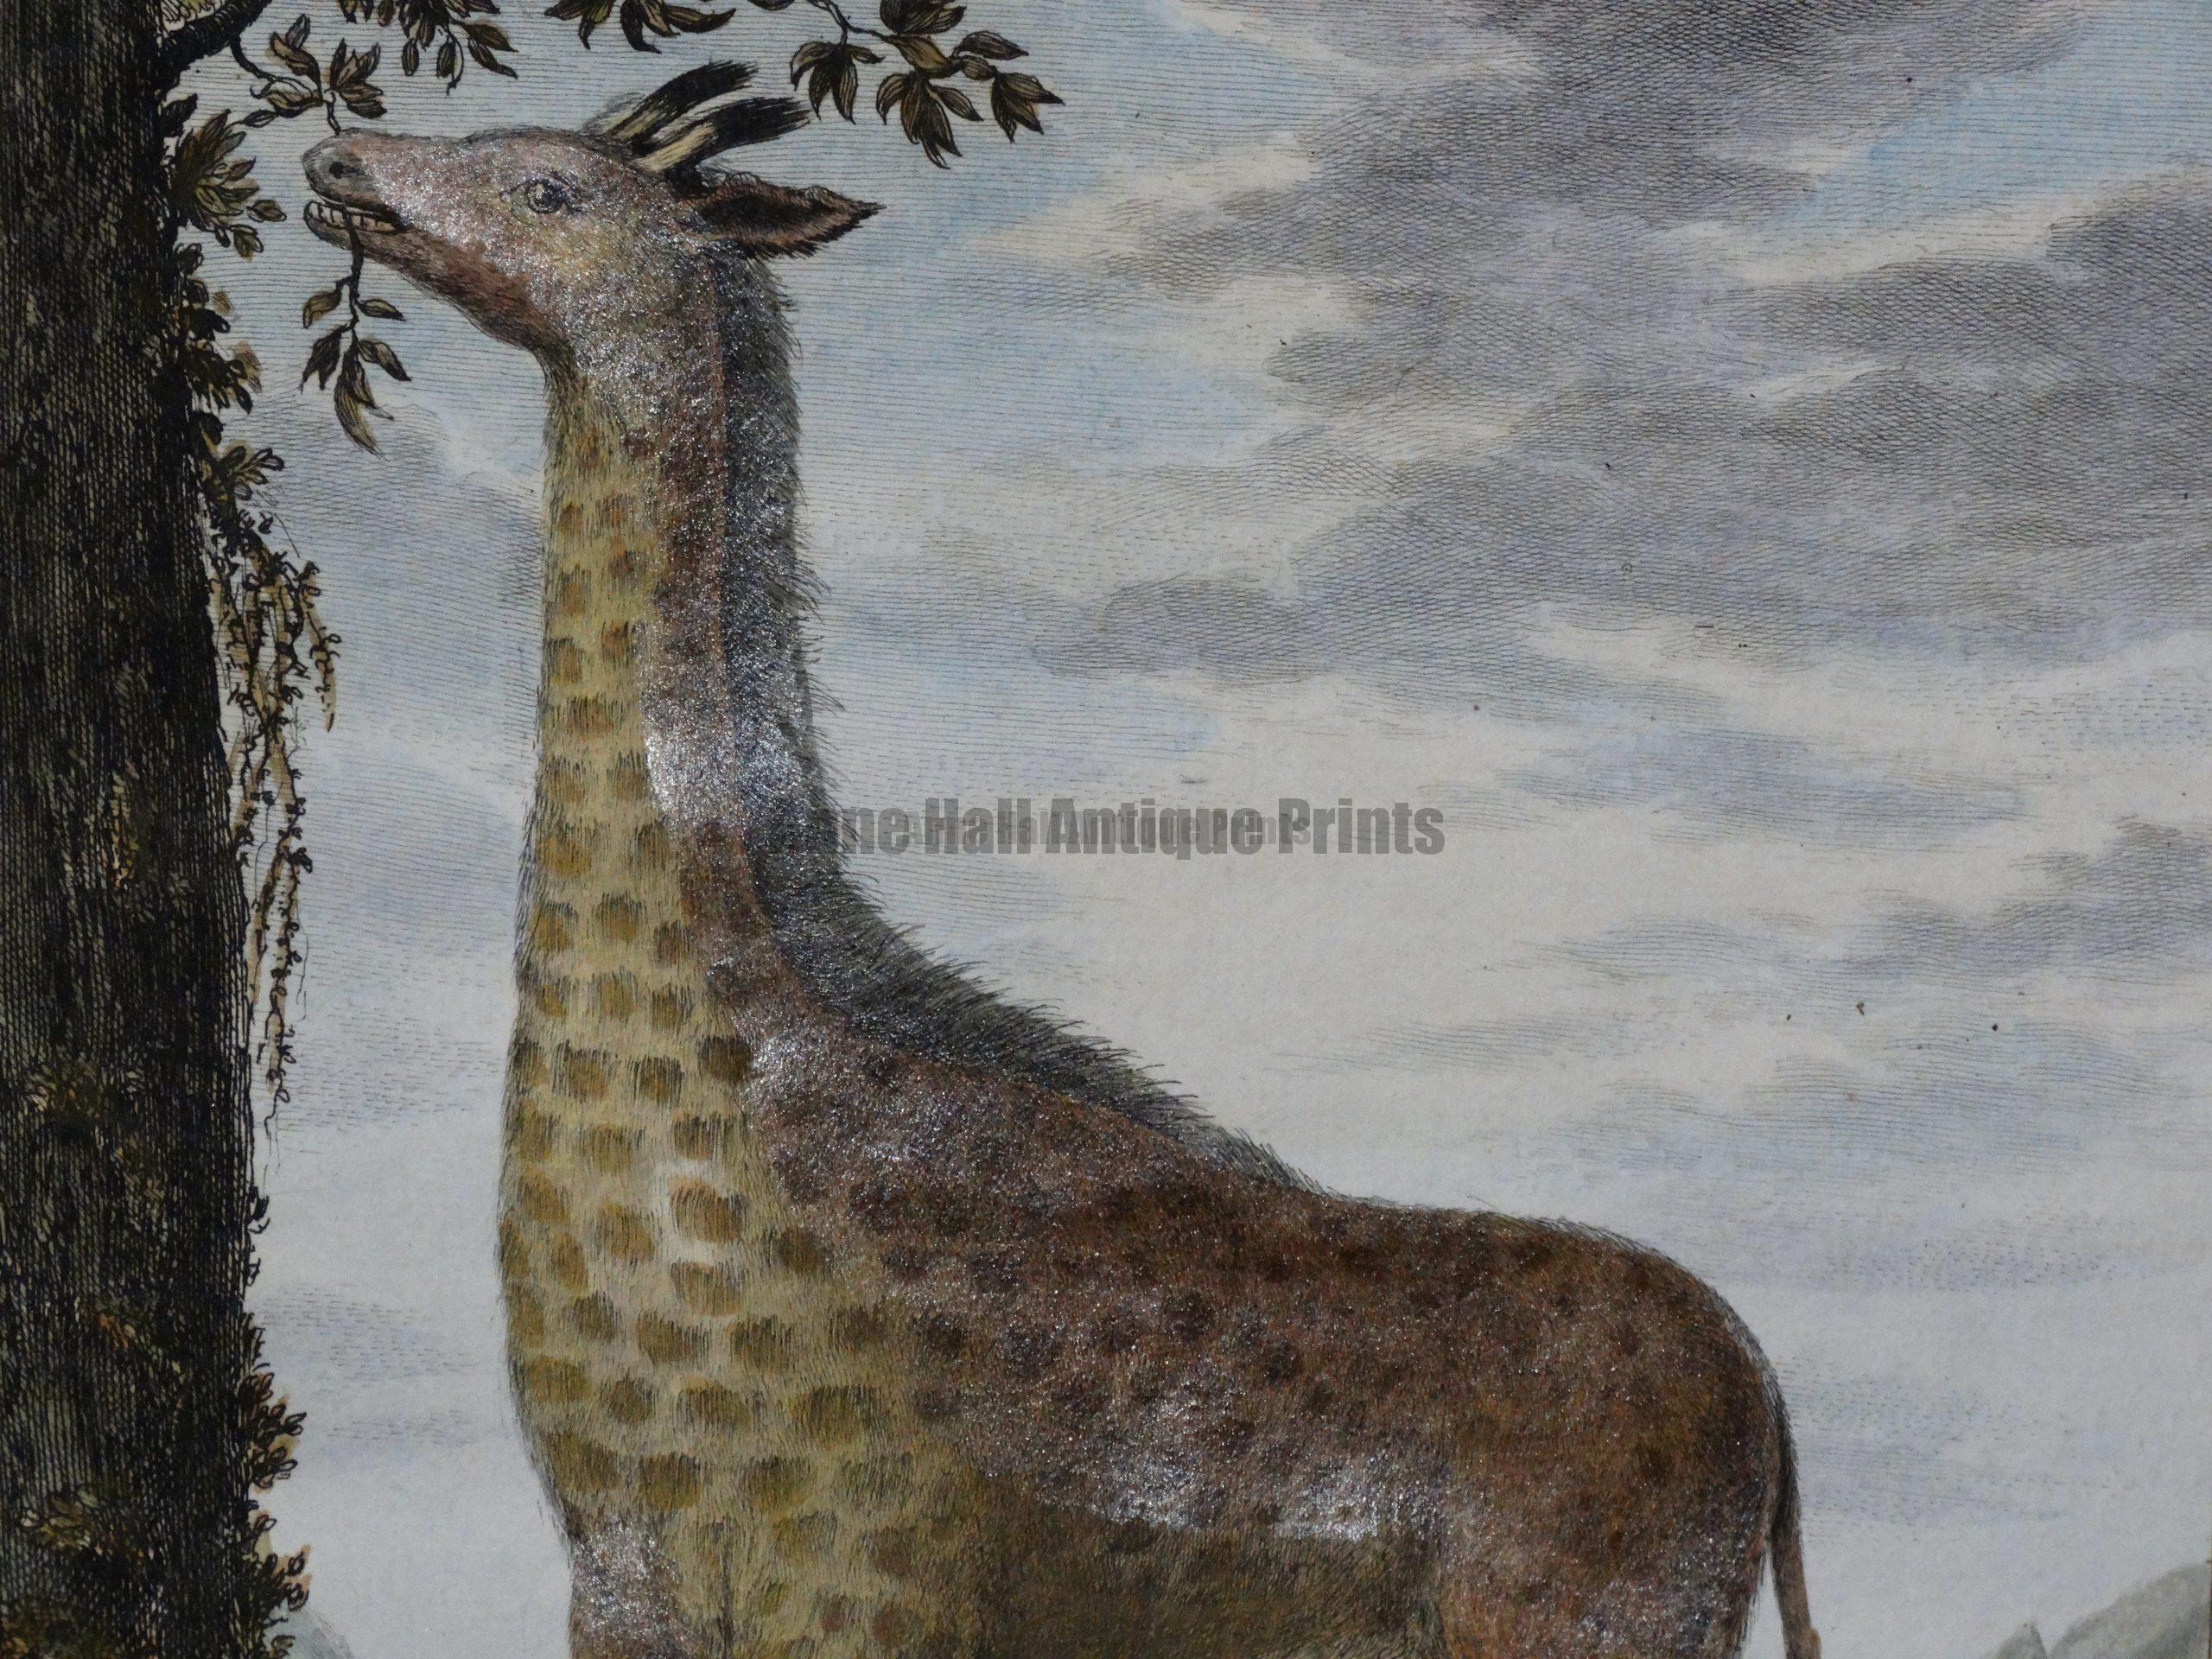 Exotic Species of Animals. Our antique prints engravings and lithographs, are over 100 years old.